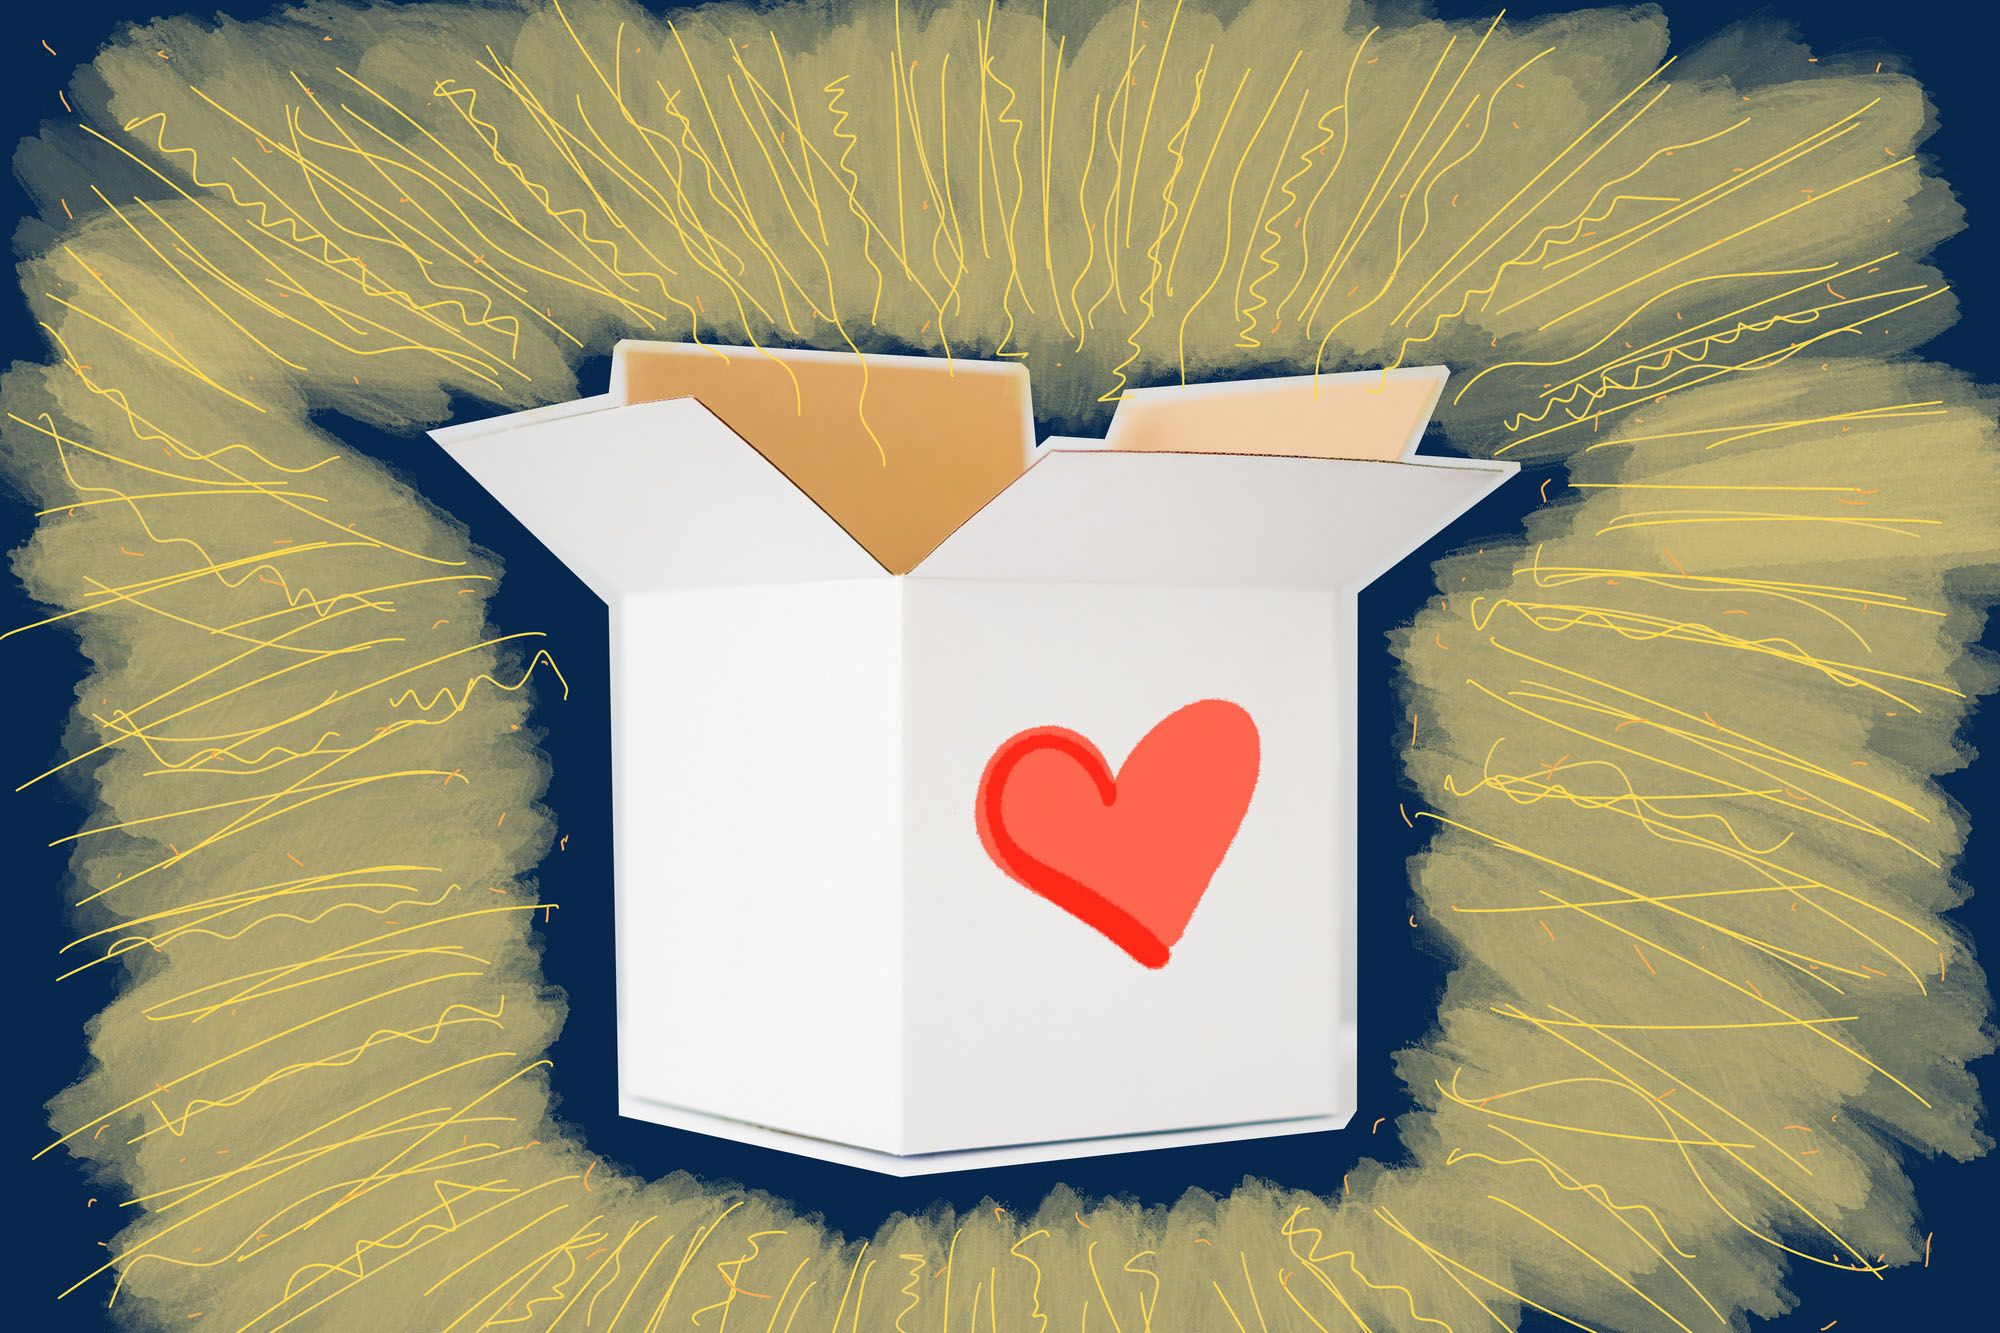 Illustration of open box with heart on it, and yellow lines leading away from it like a starburst